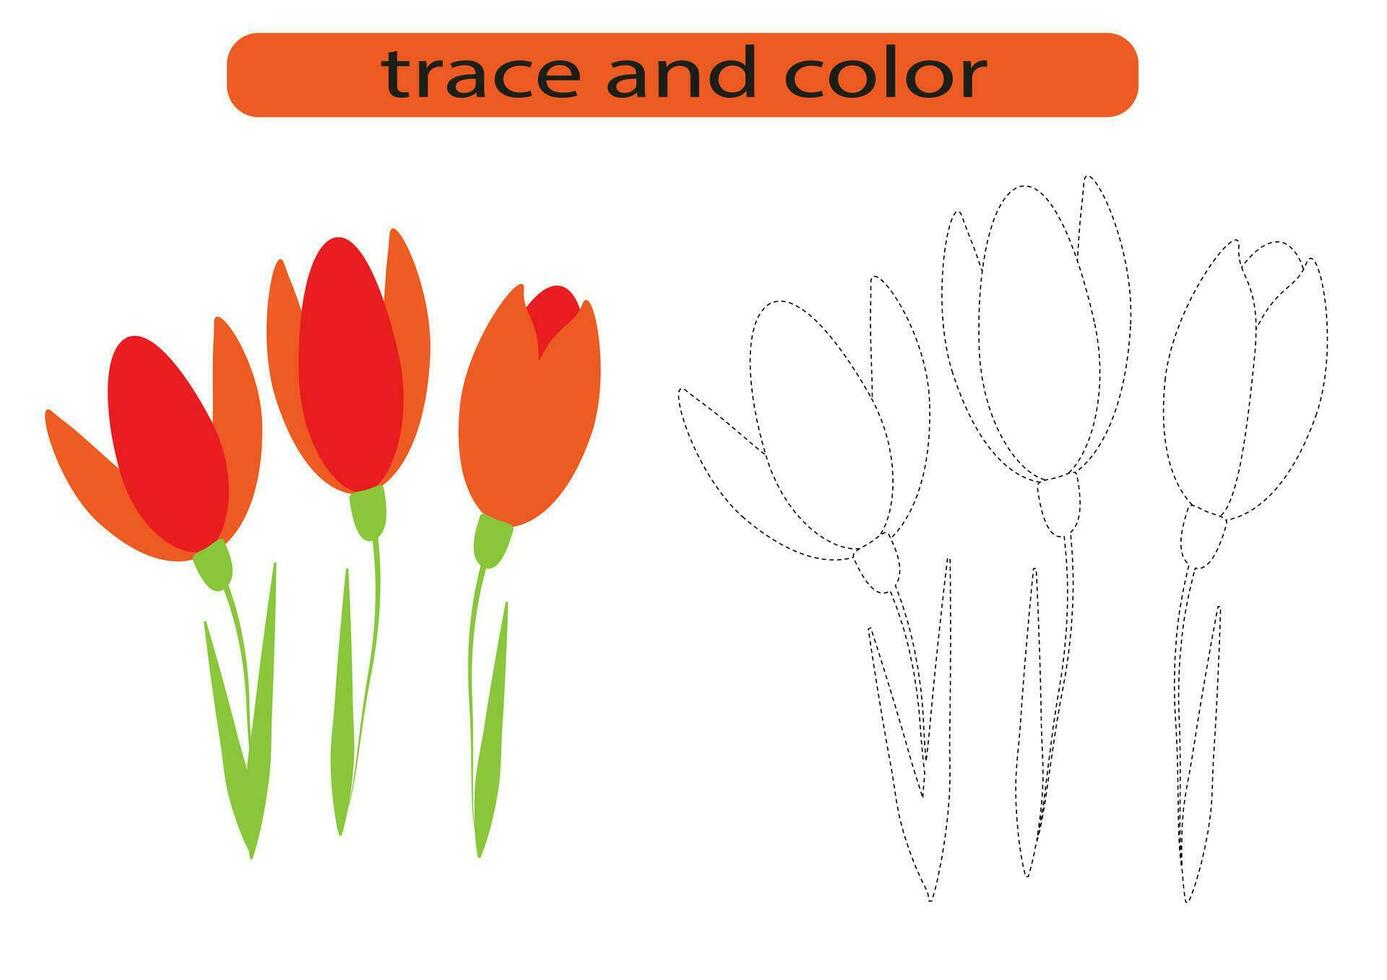 Trace and color the flowers. Coloring book for preschool children. Handwriting practice. vector